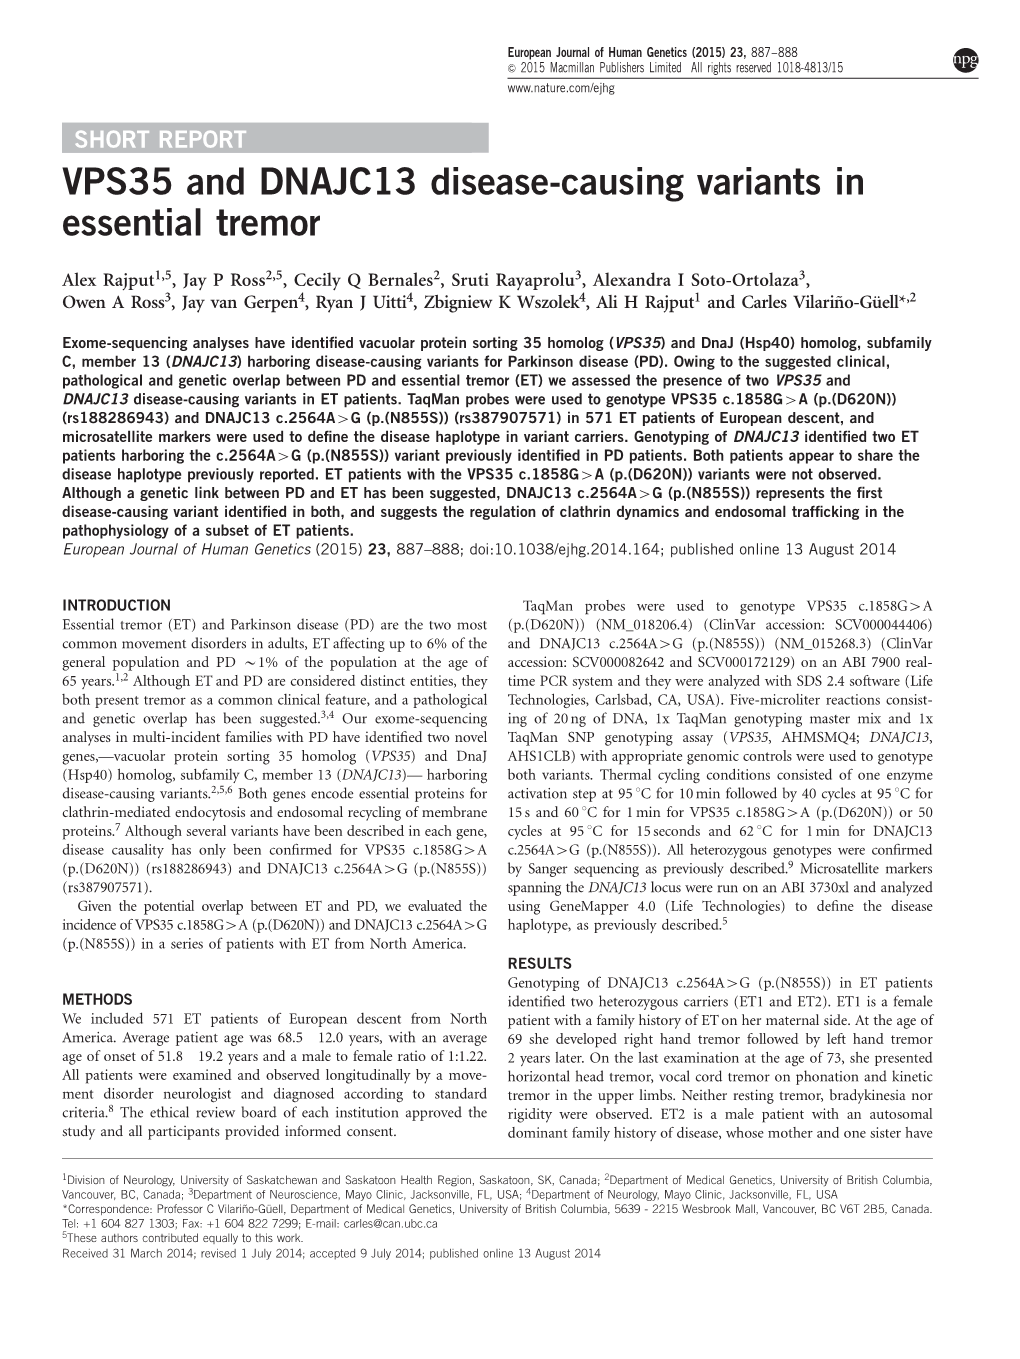 VPS35 and DNAJC13 Disease-Causing Variants in Essential Tremor